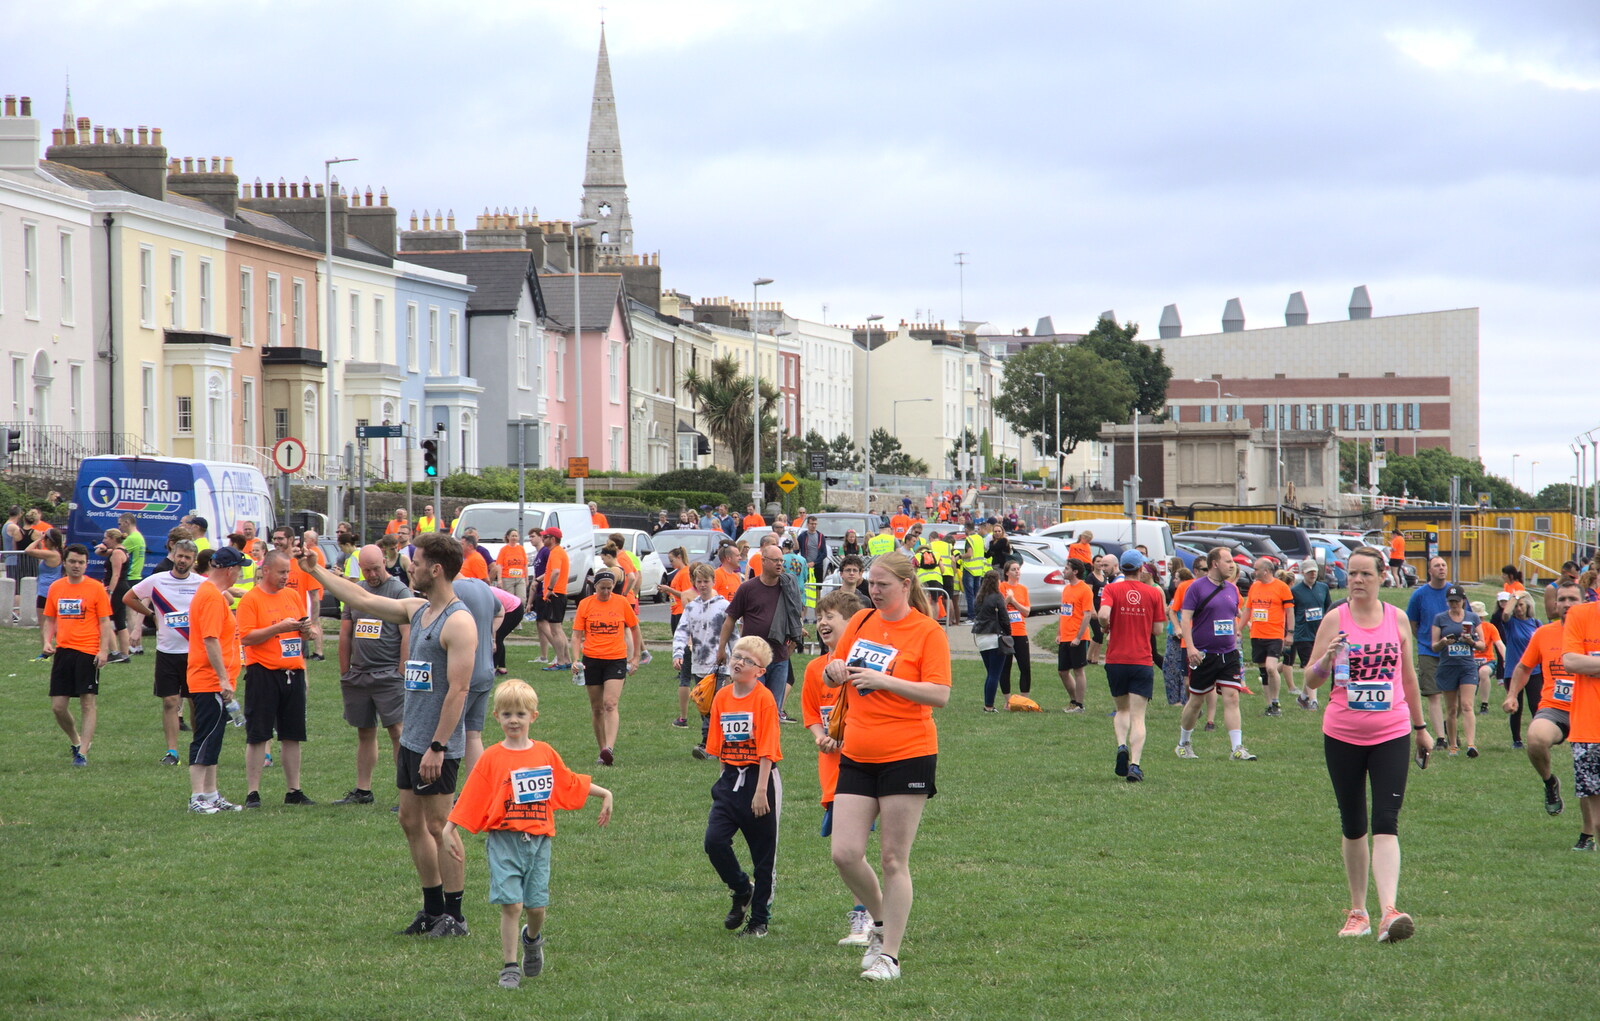 A sea of orange tops from The Dún Laoghaire 10k Run, County Dublin, Ireland - 6th August 2018